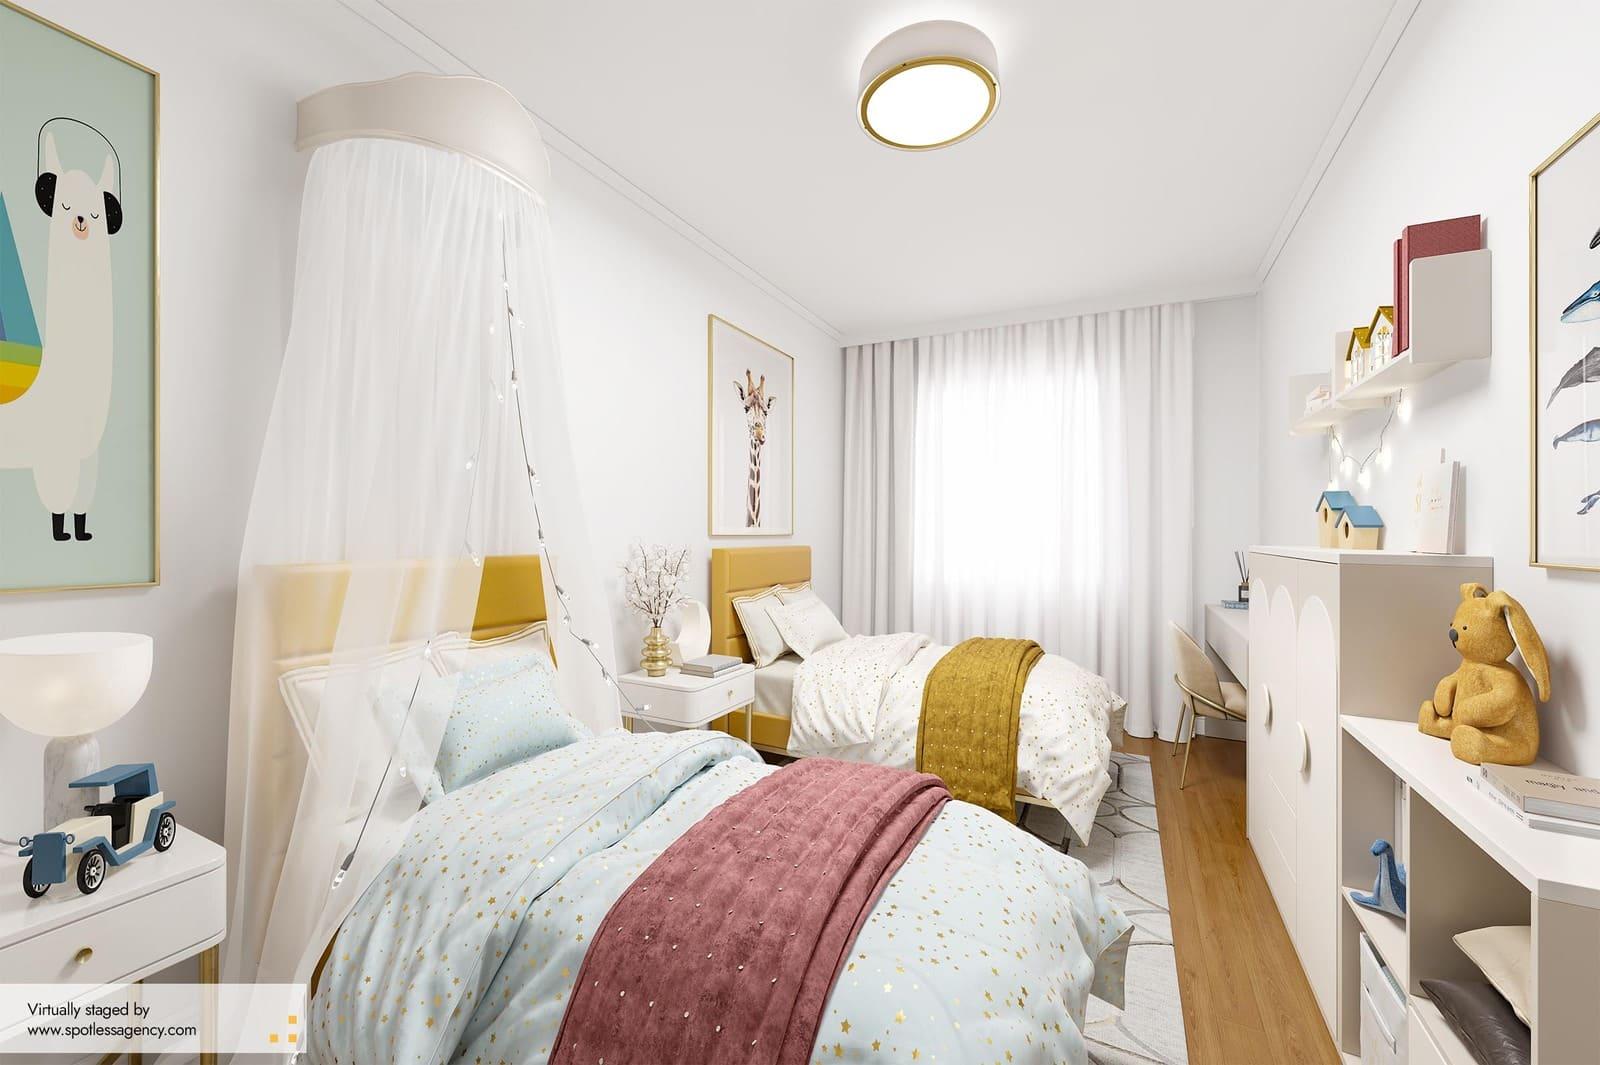 Virtual staging daily selection 5